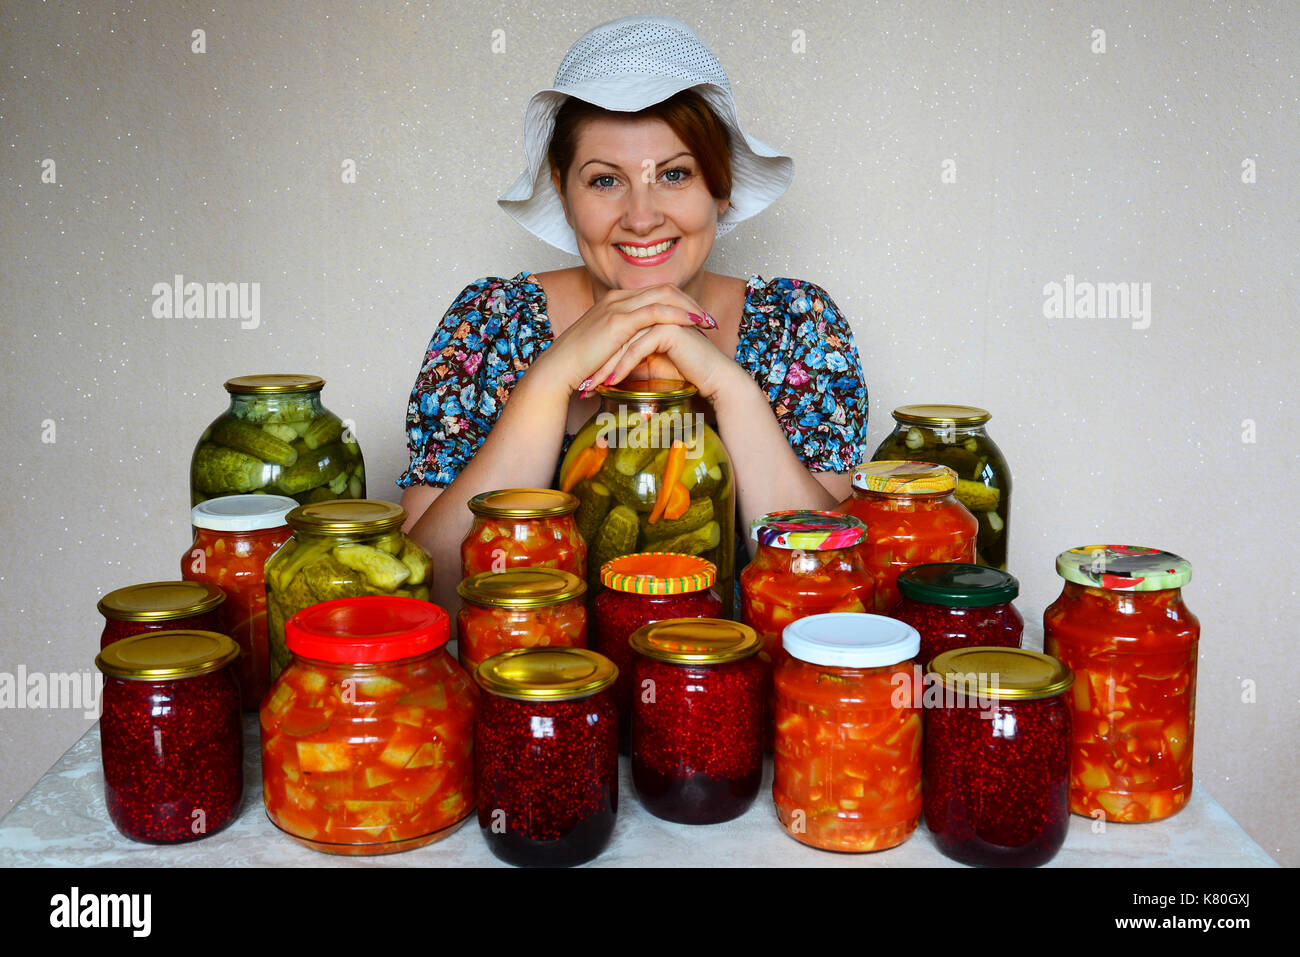 Happy housewife with homemade canned food Stock Photo